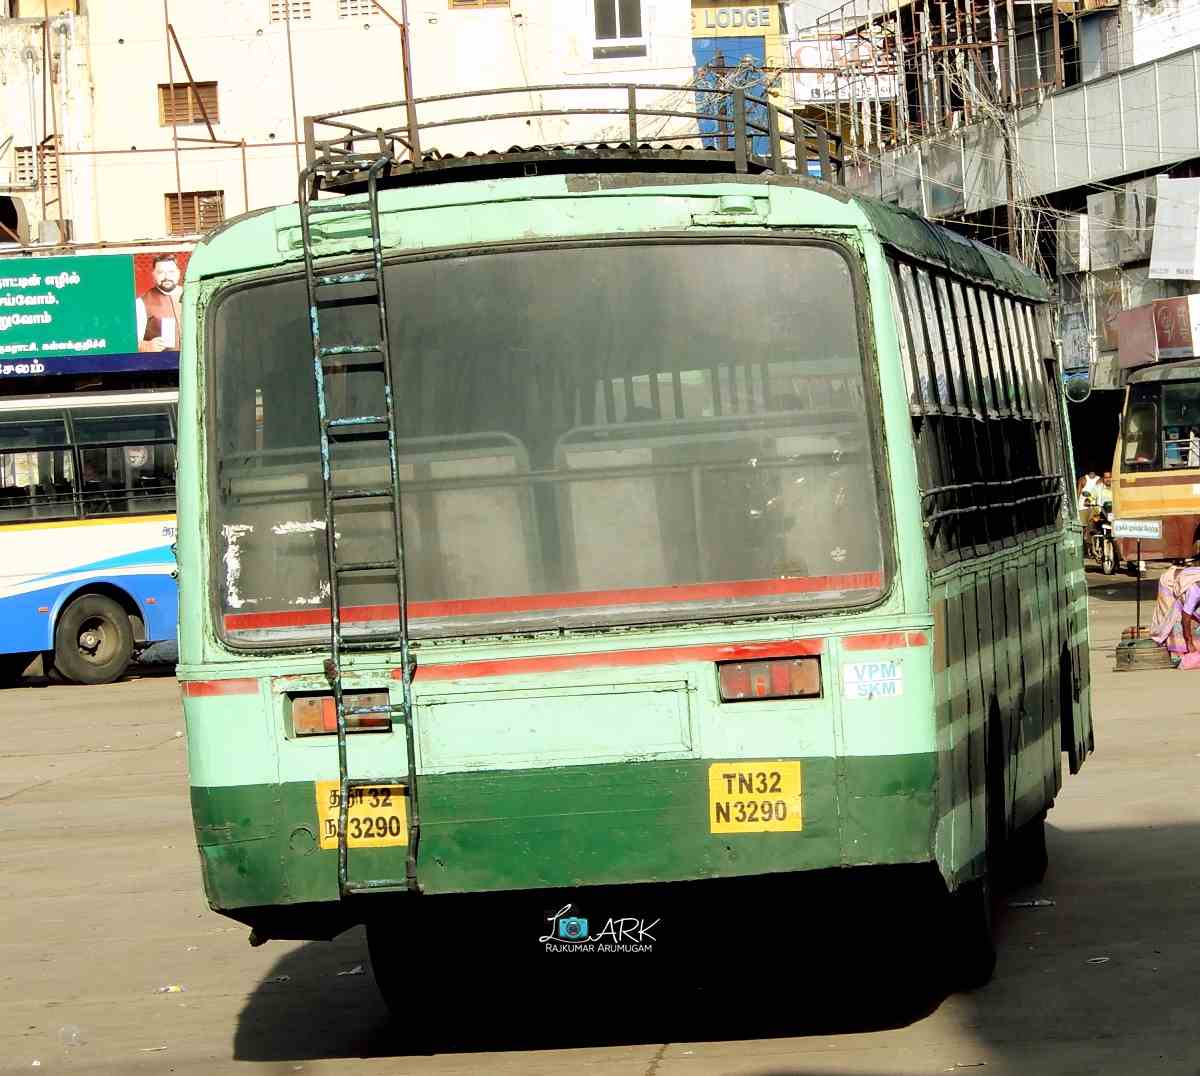 TNSTC Bus Timings from Tirukoilur Bus Stand